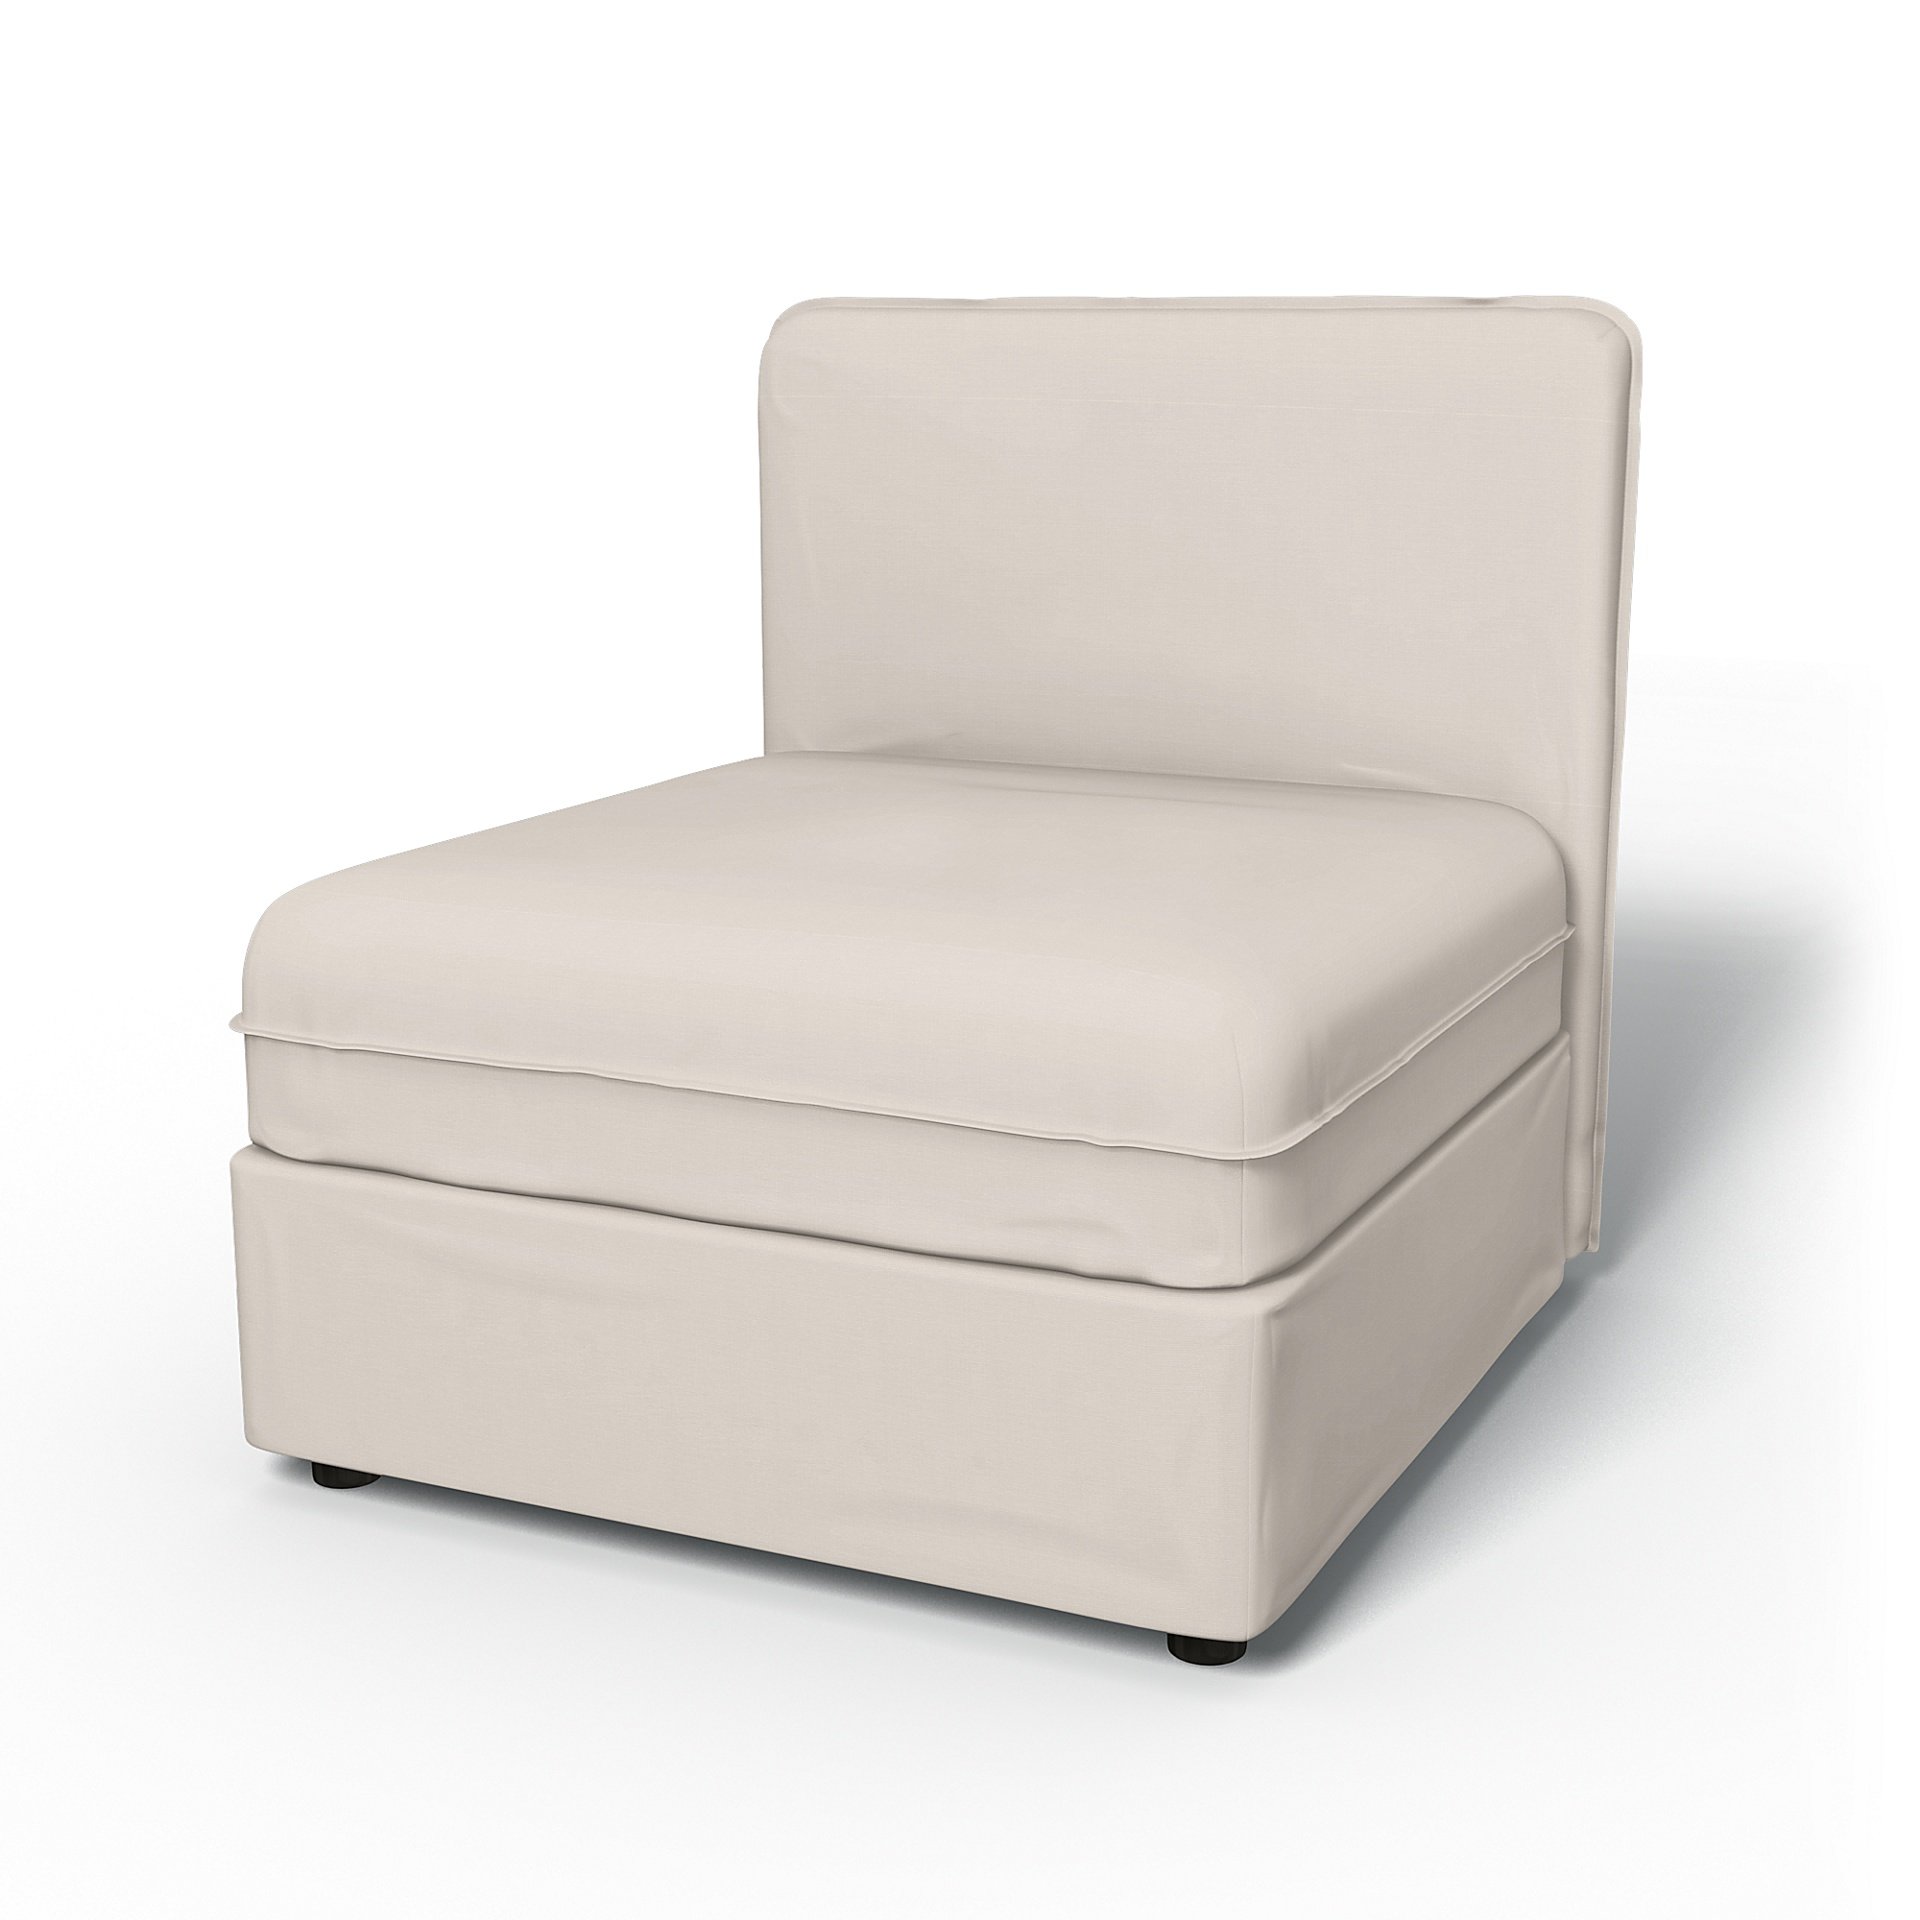 IKEA - Vallentuna Seat Module with Low Back Cover 80x80cm 32x32in, Soft White, Cotton - Bemz